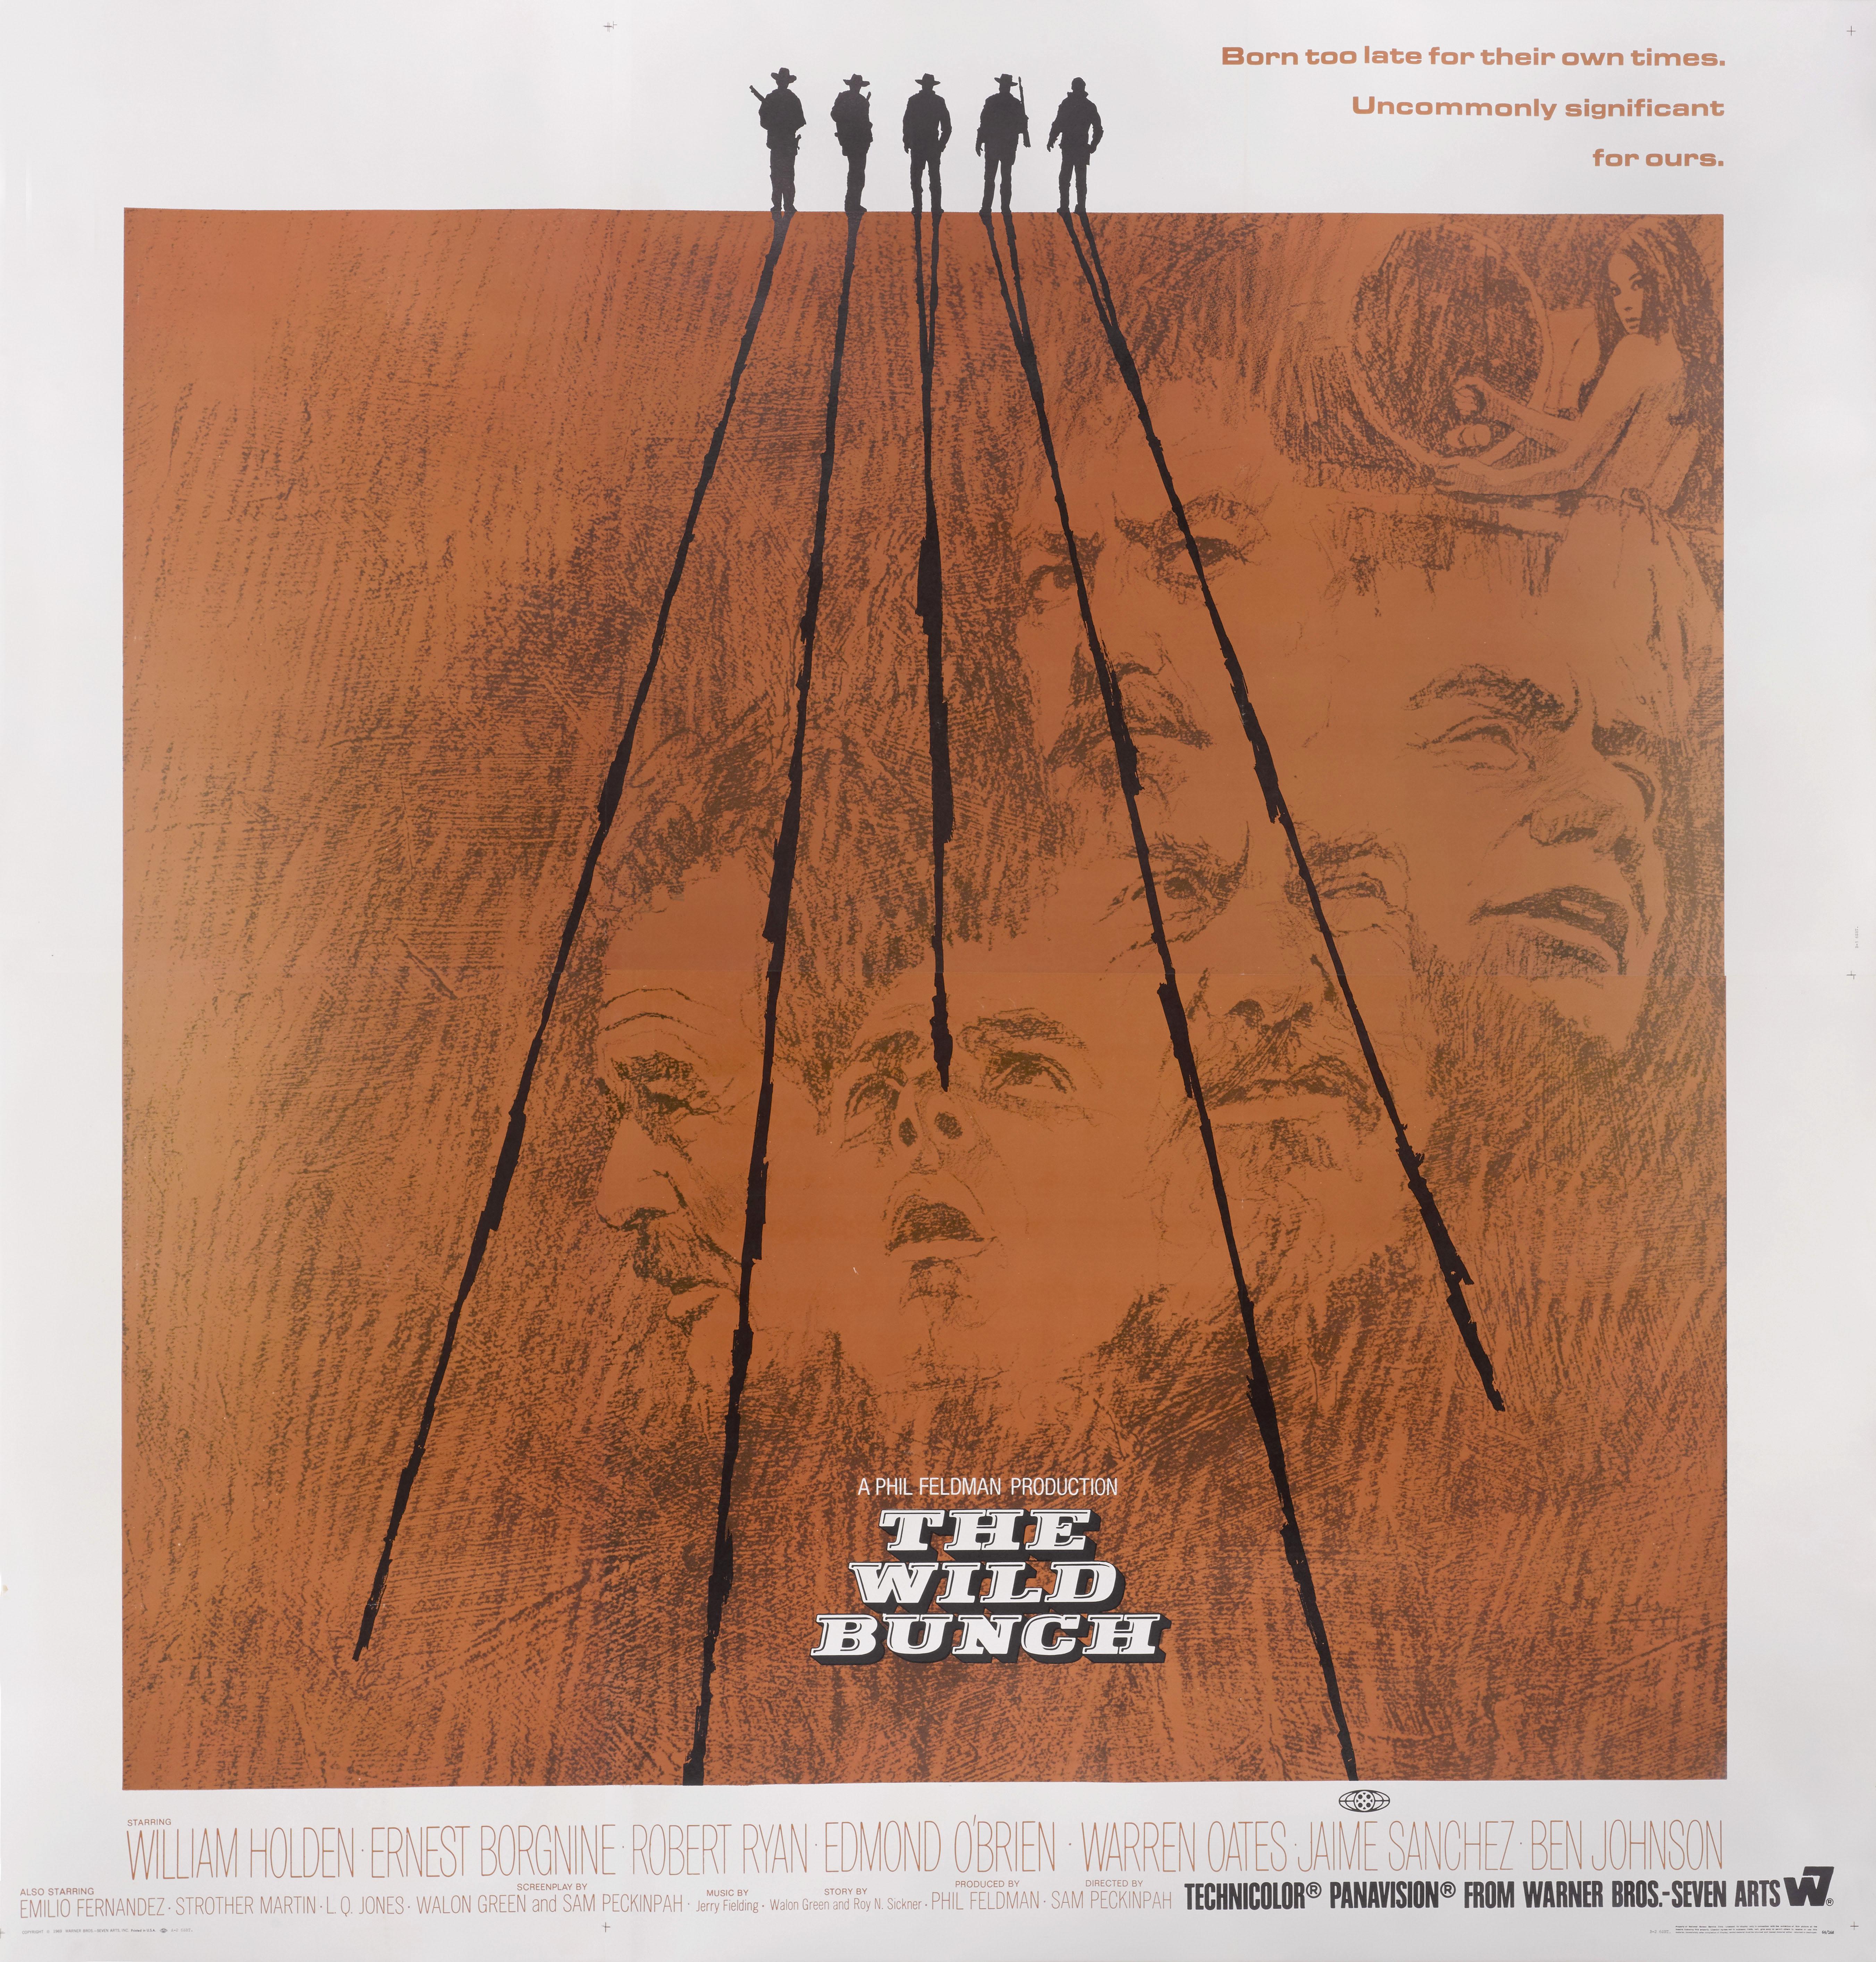 Original American film poster for Sam Peckinpah's 1969 western The Wild Bunch.
This exceptionally rare poster was printed in 4 sheets and designed to be pasted onto billboards, therefore only unused examples survived. This film starred William